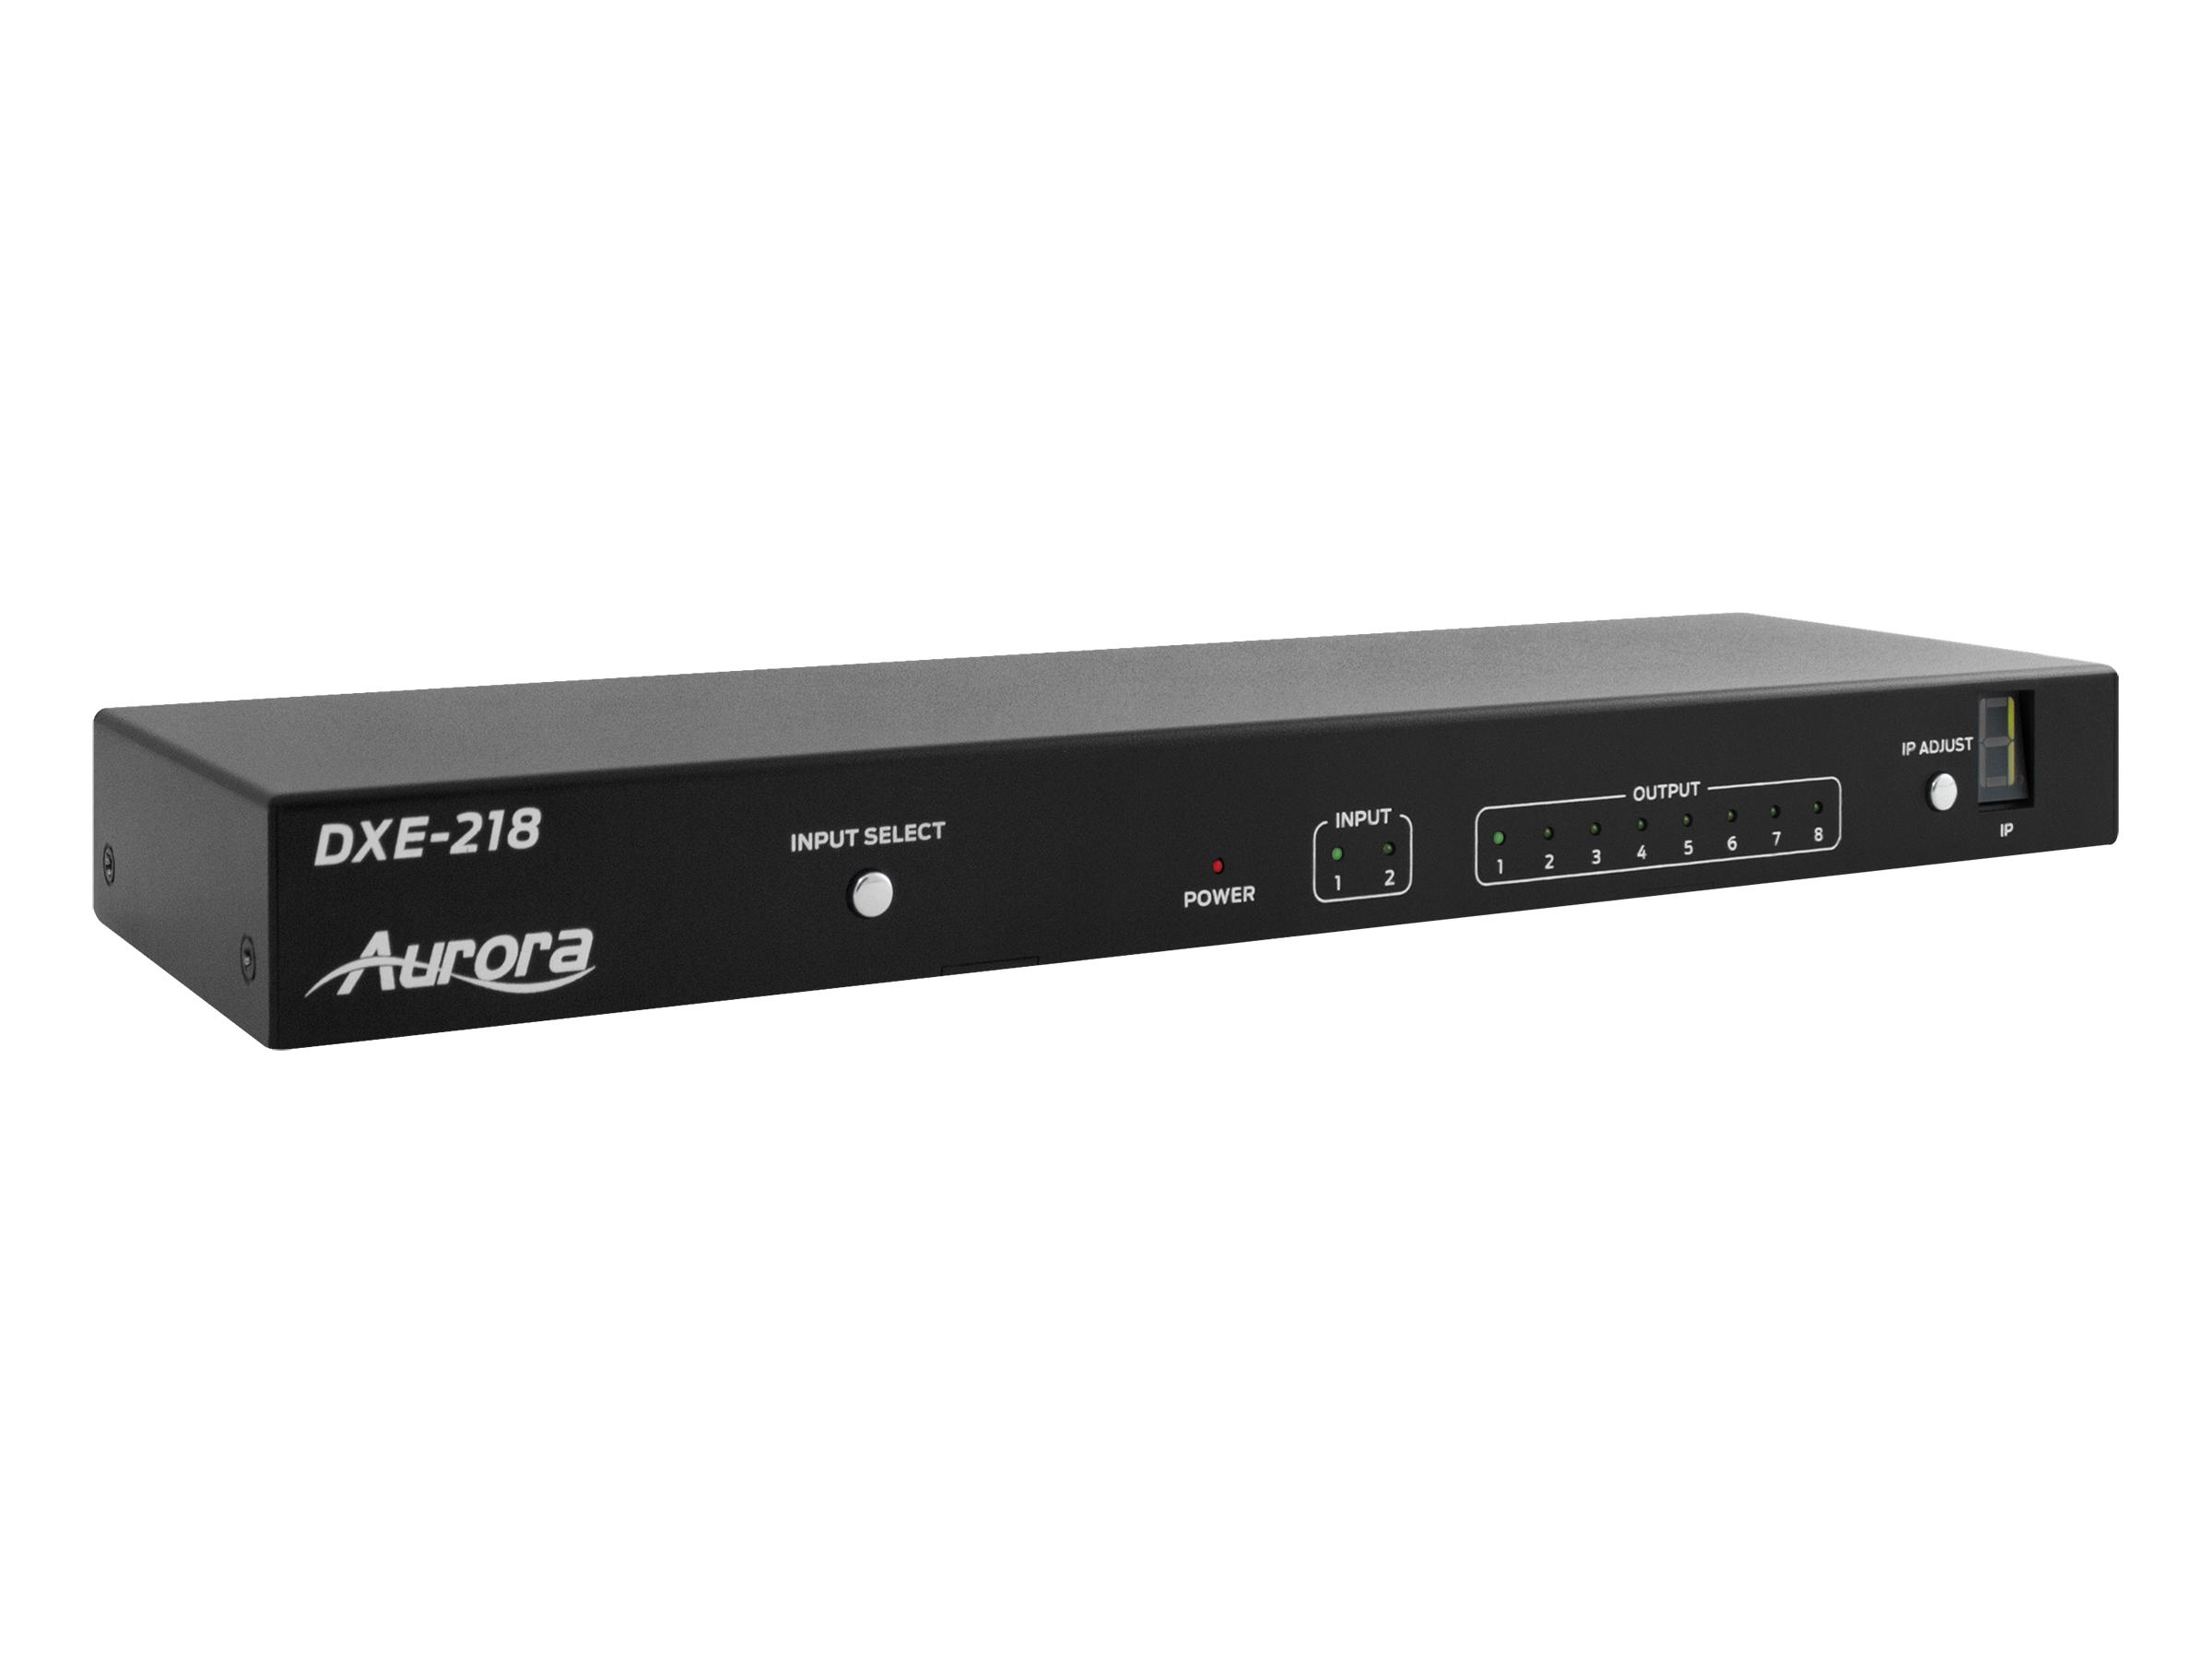 DXE-218 2x8 HDMI 4K Advanced Splitter with Downscaling by Aurora Multimedia